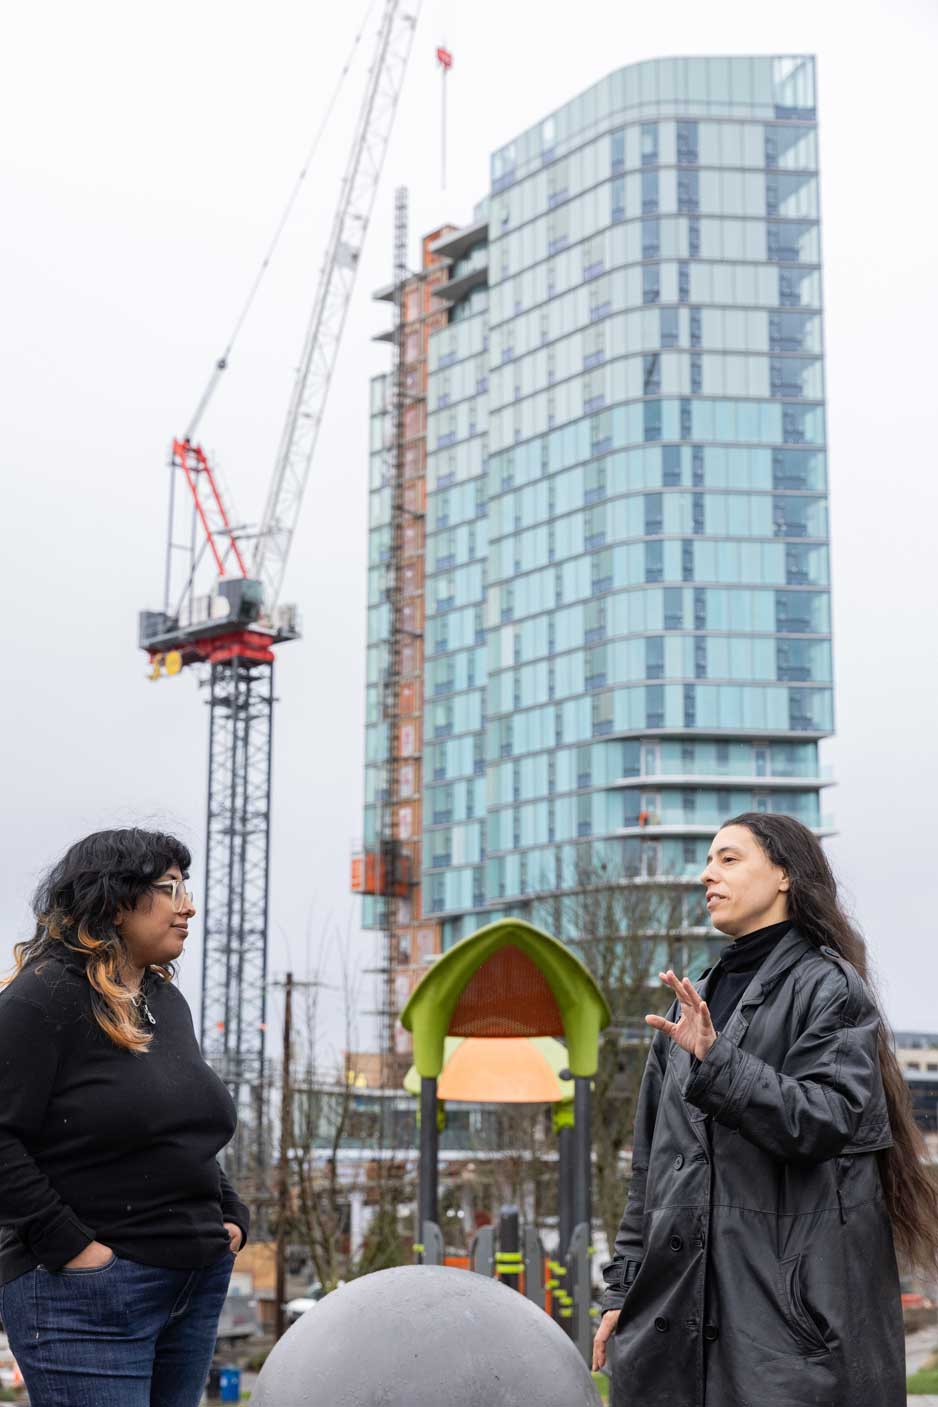 Saunatina Sanchez, candidate for Seattle City Council Position 8 has long dark hair and dark eyes.  She is speaking to another woman int front of a playground with a skyscaper and crane in the background.